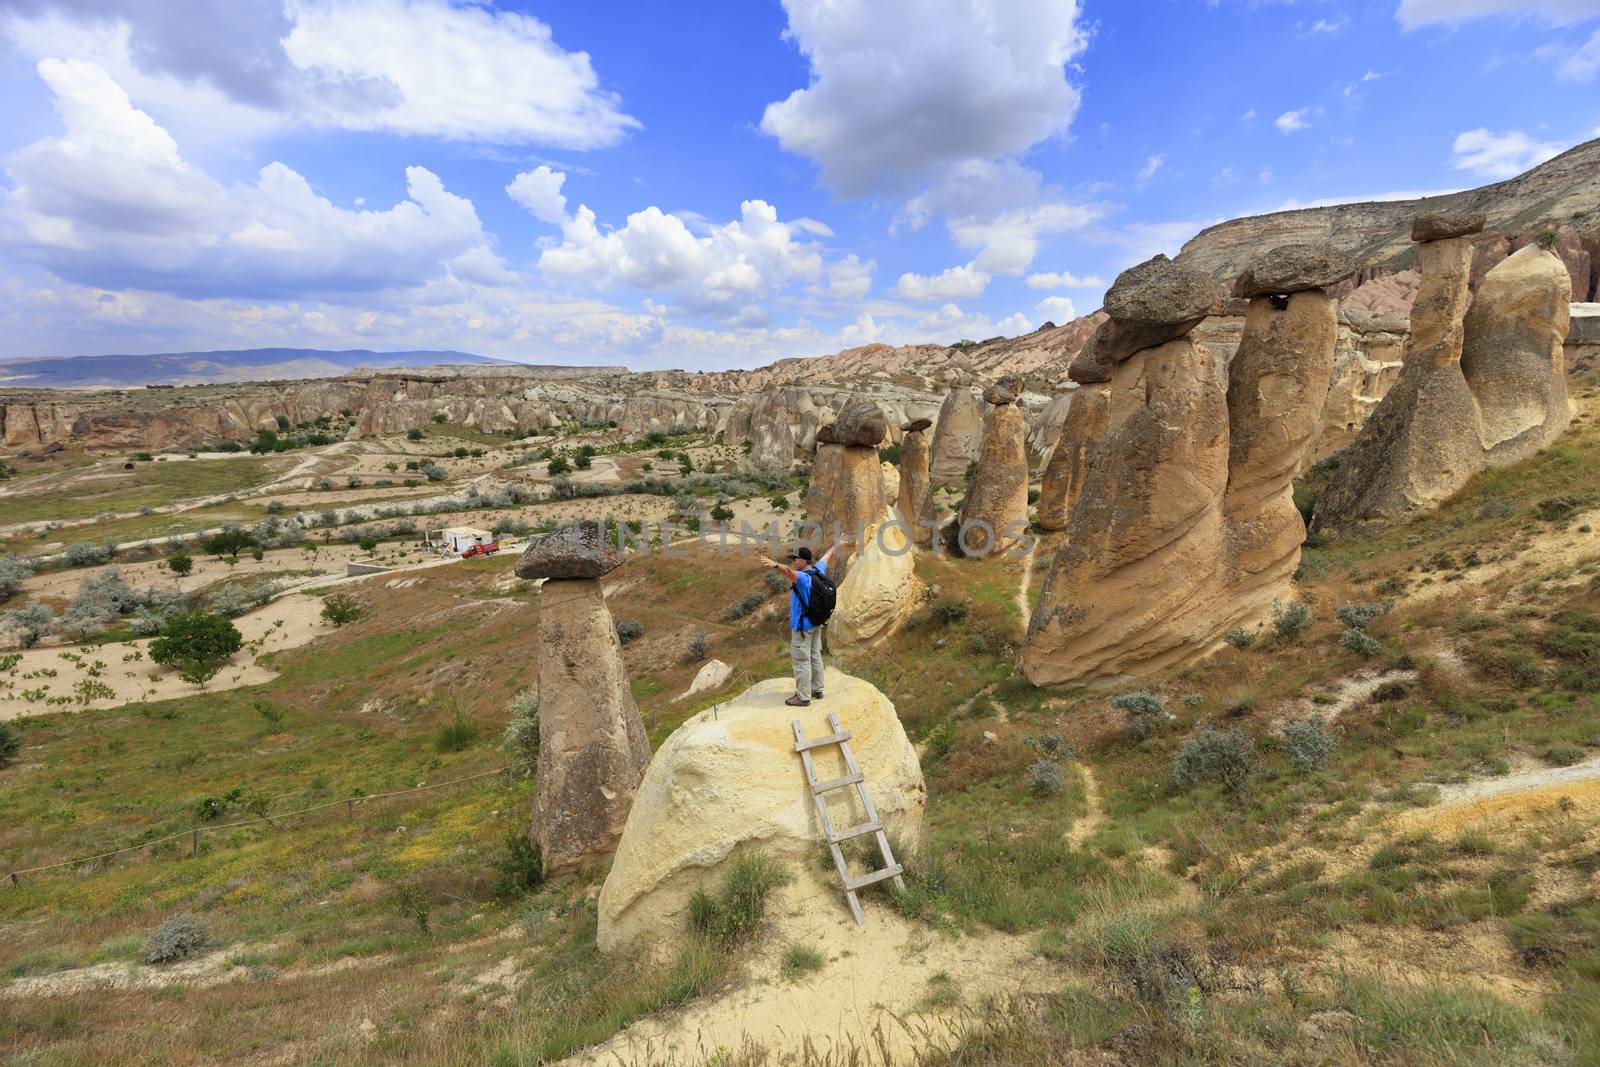 A young man stands on a rock and looks at the opening landscape and blue sky in Cappadocia. by Sergii